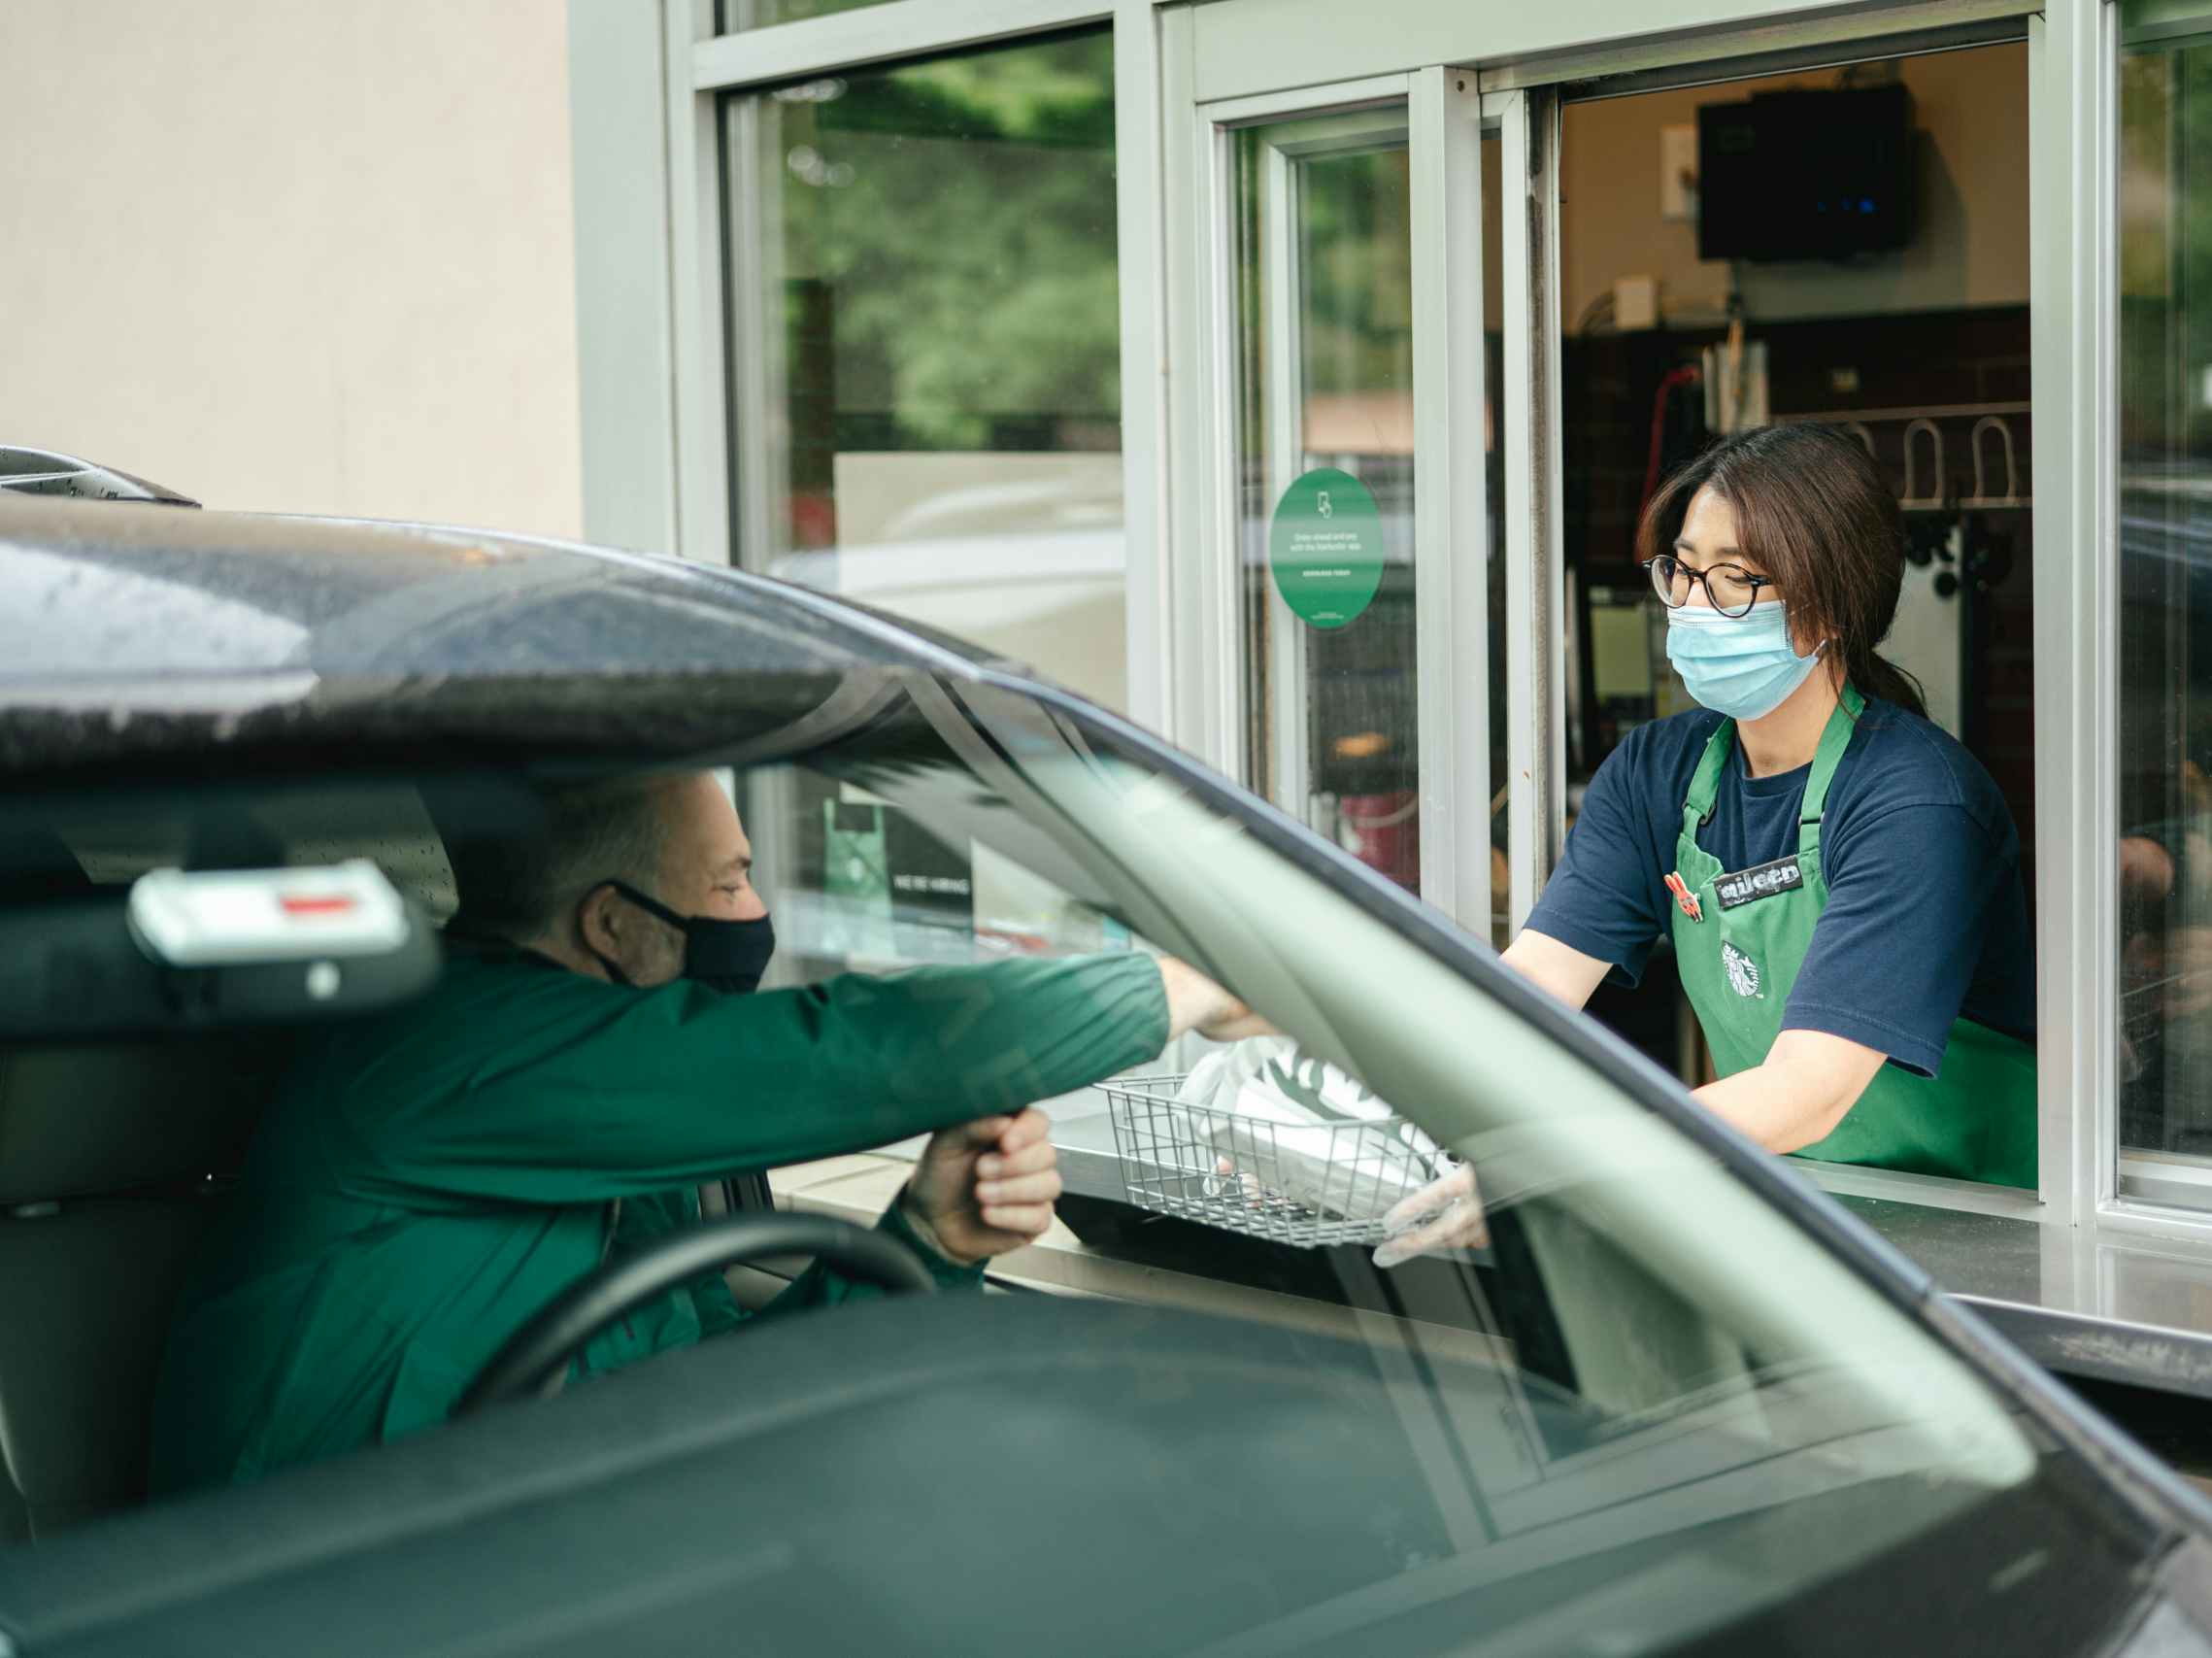 A man in his car taking food from a Starbucks barista at the drive through window.